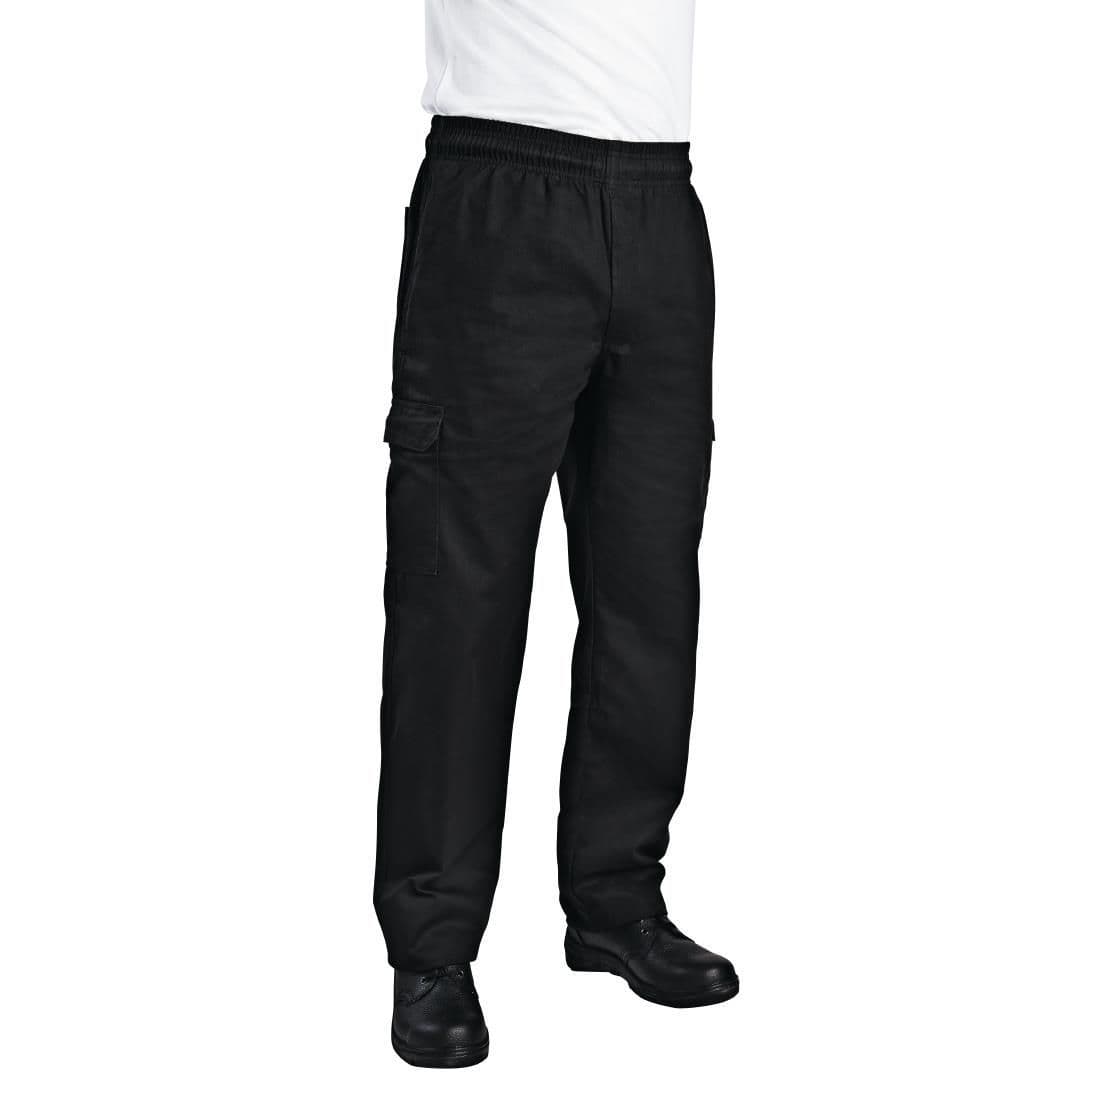 Chef Works Unisex Slim Fit Cargo Chefs Trousers Black JD Catering Equipment Solutions Ltd